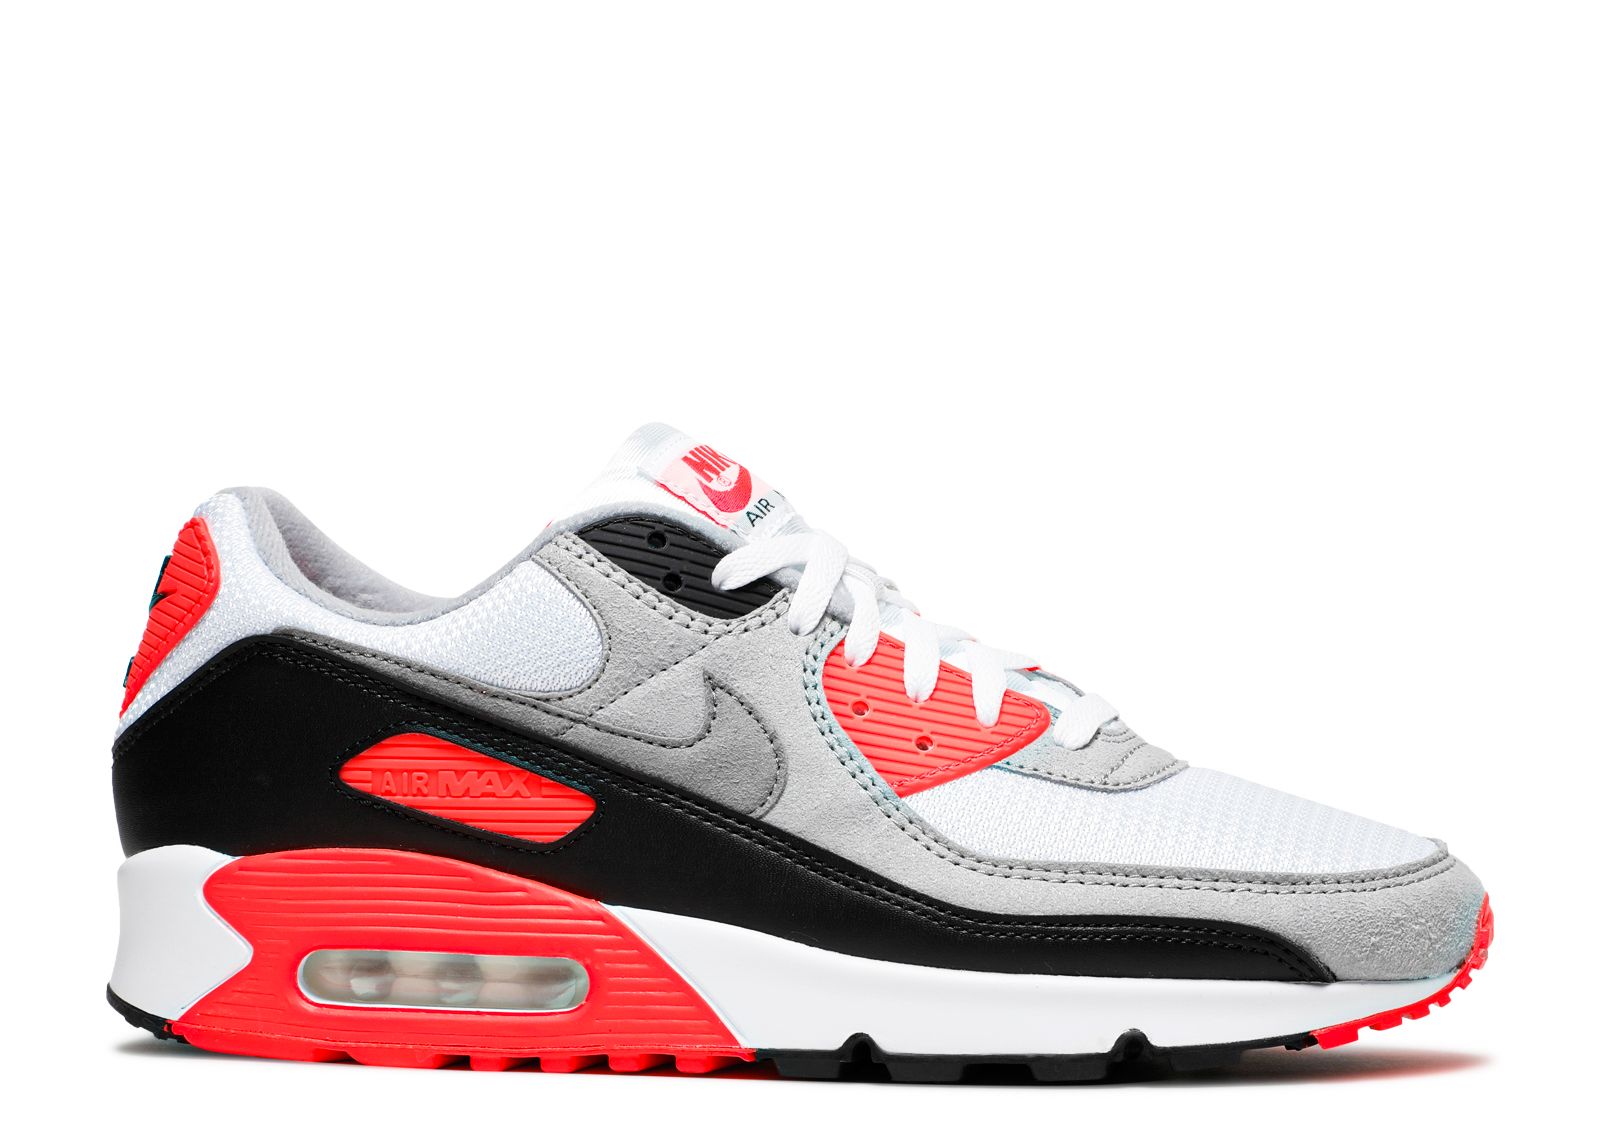 Absorbent Abandoned nicotine Air Max 90 'Infrared' 2020 - Nike - CT1685 100 - white/black/cool  grey/radiant red | Flight Club